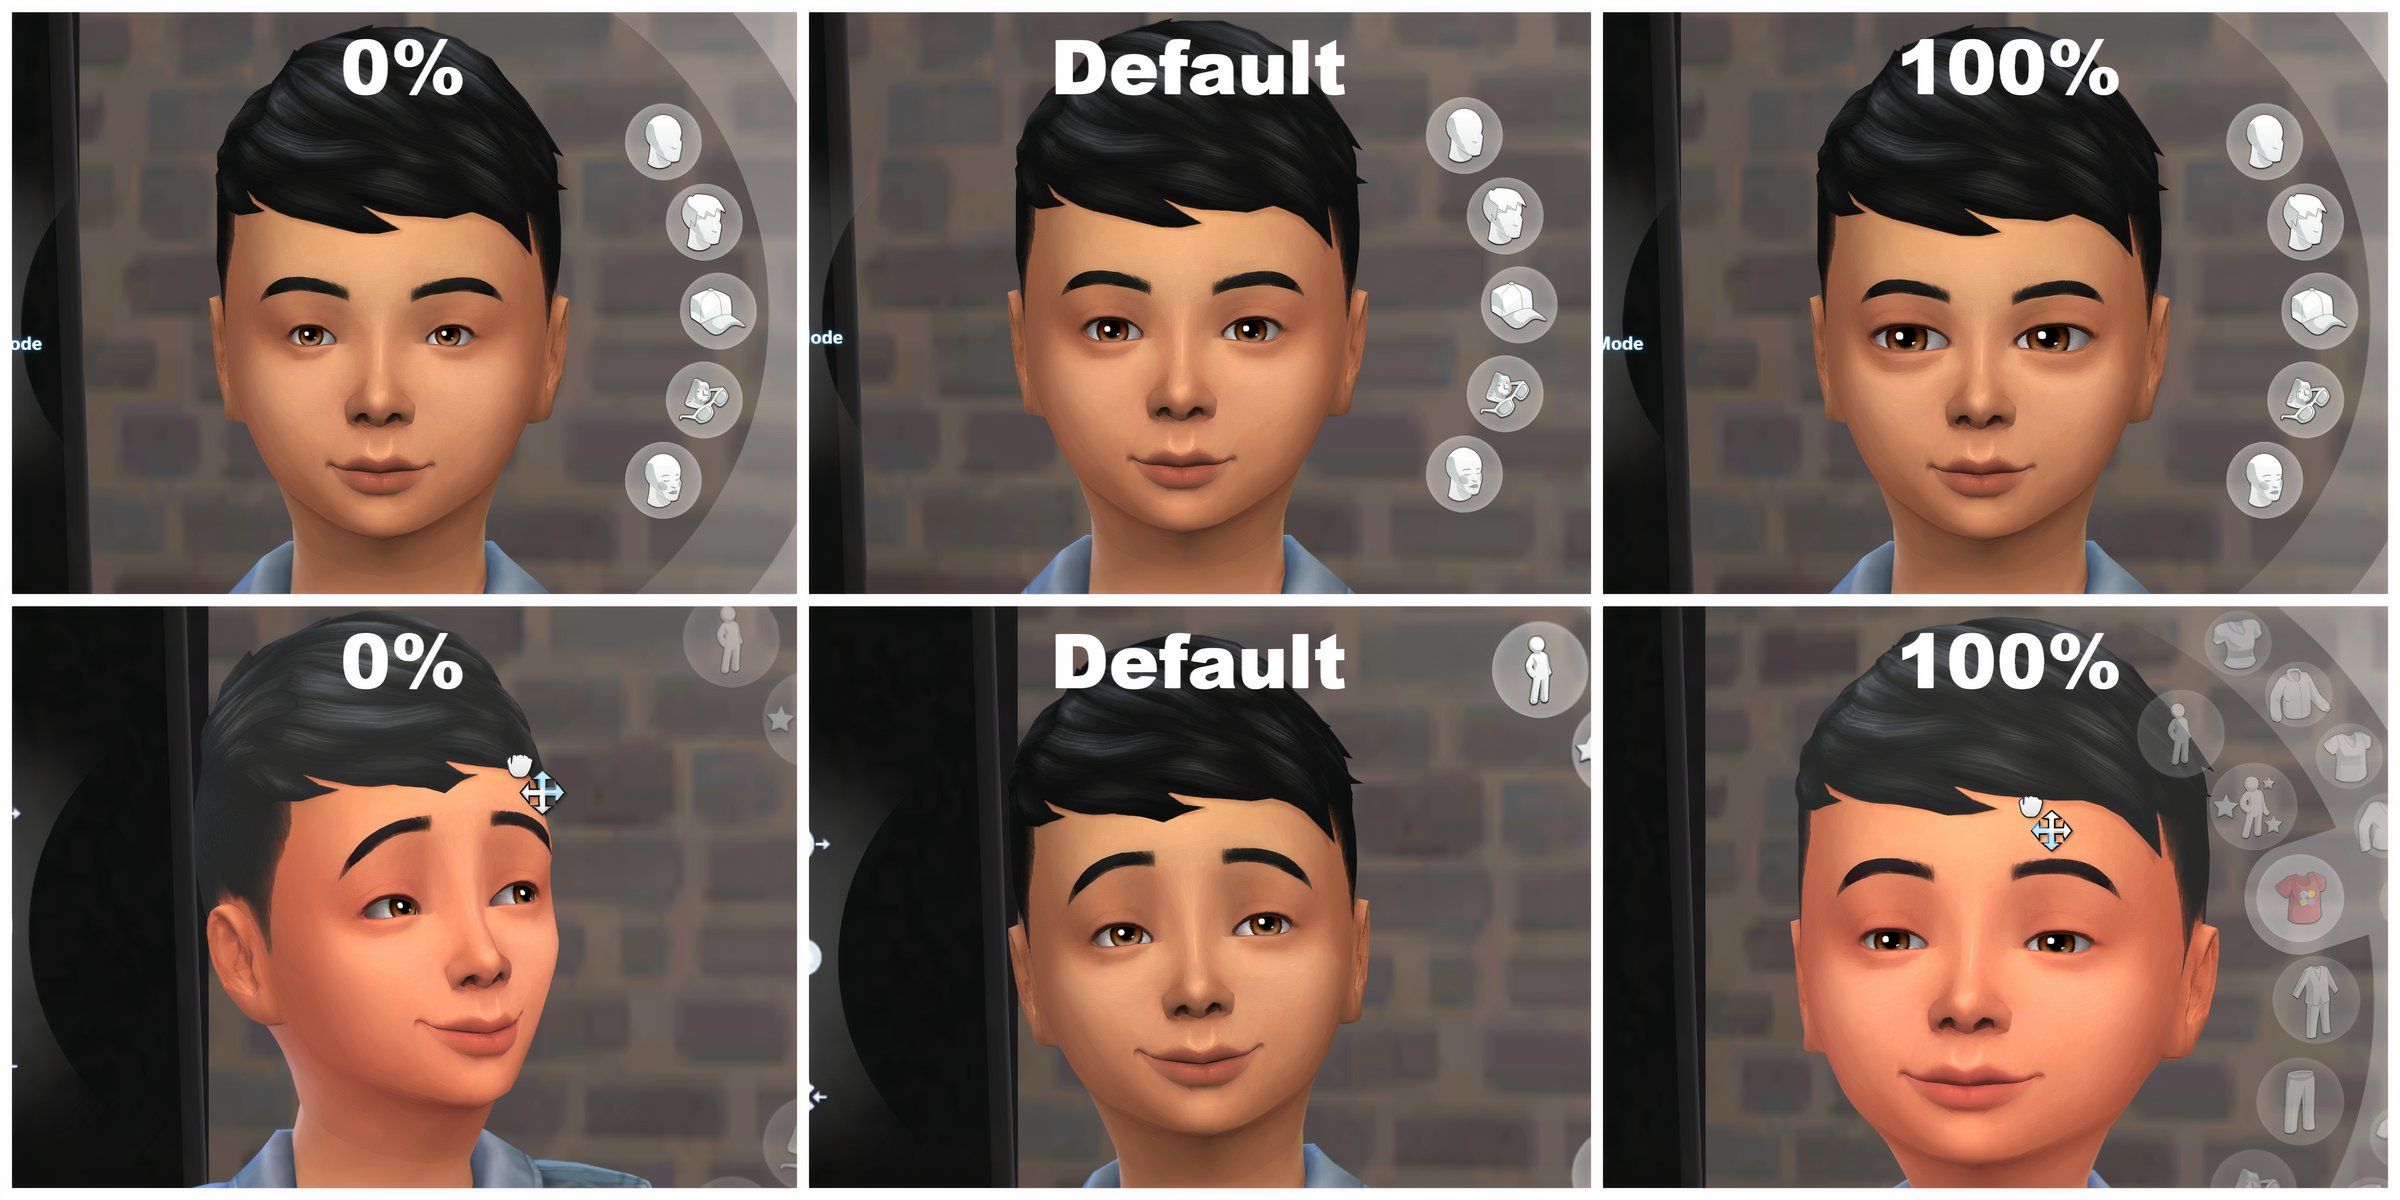 The defaults and the most exaggerated versions with the Expanded Eye Slider mod